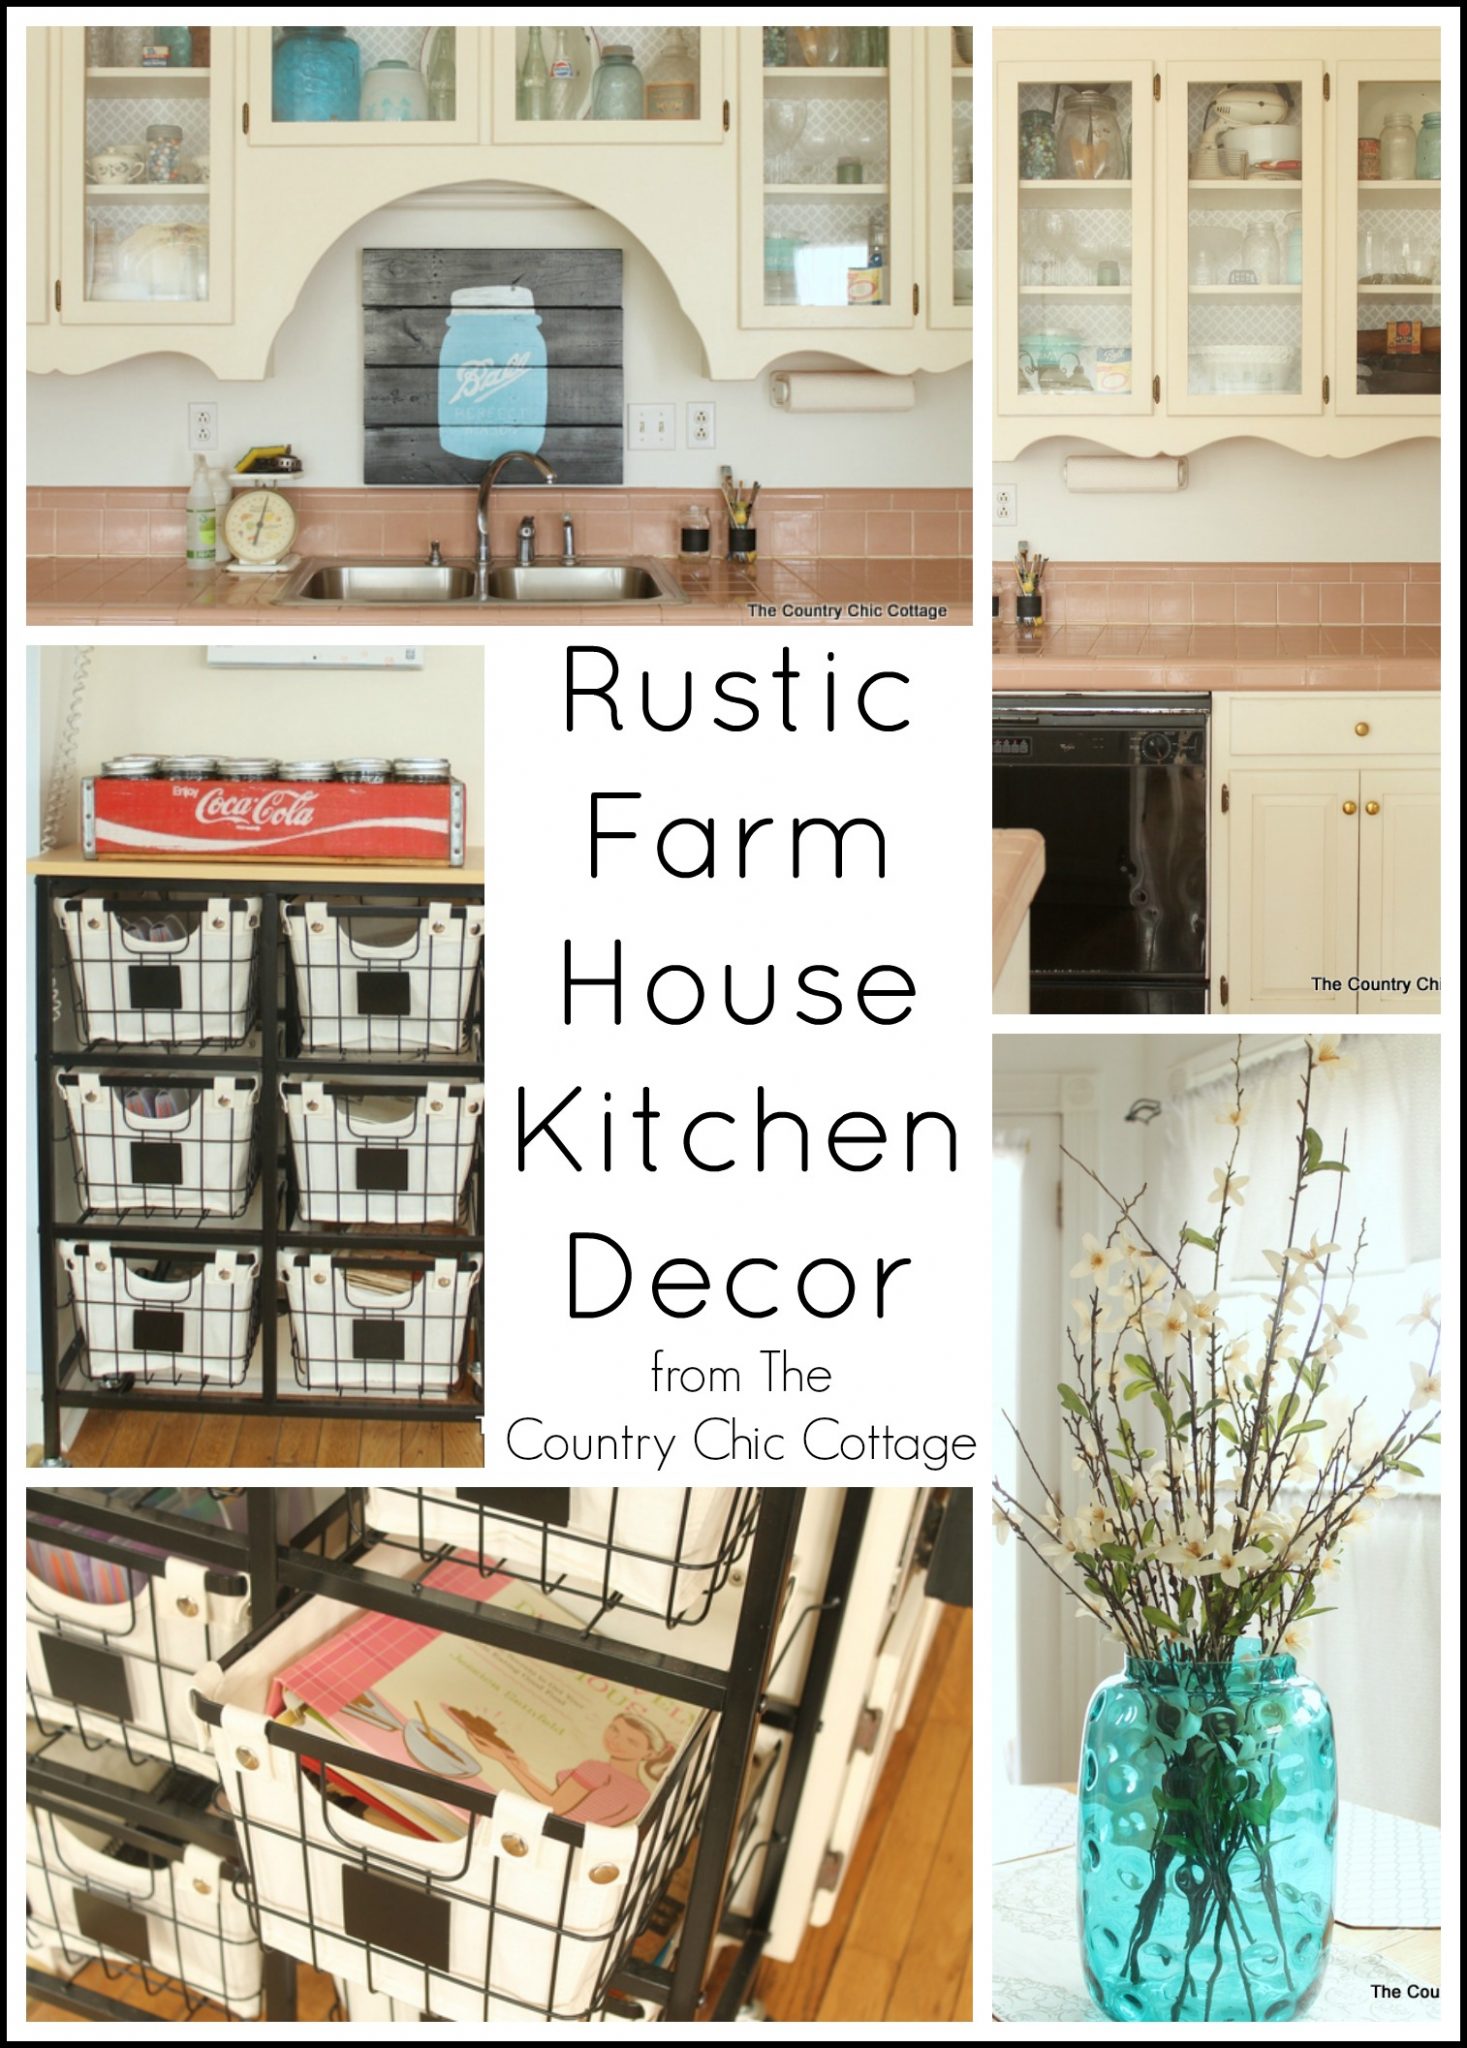 Rustic Farmhouse Kitchen Decor - The Country Chic Cottage